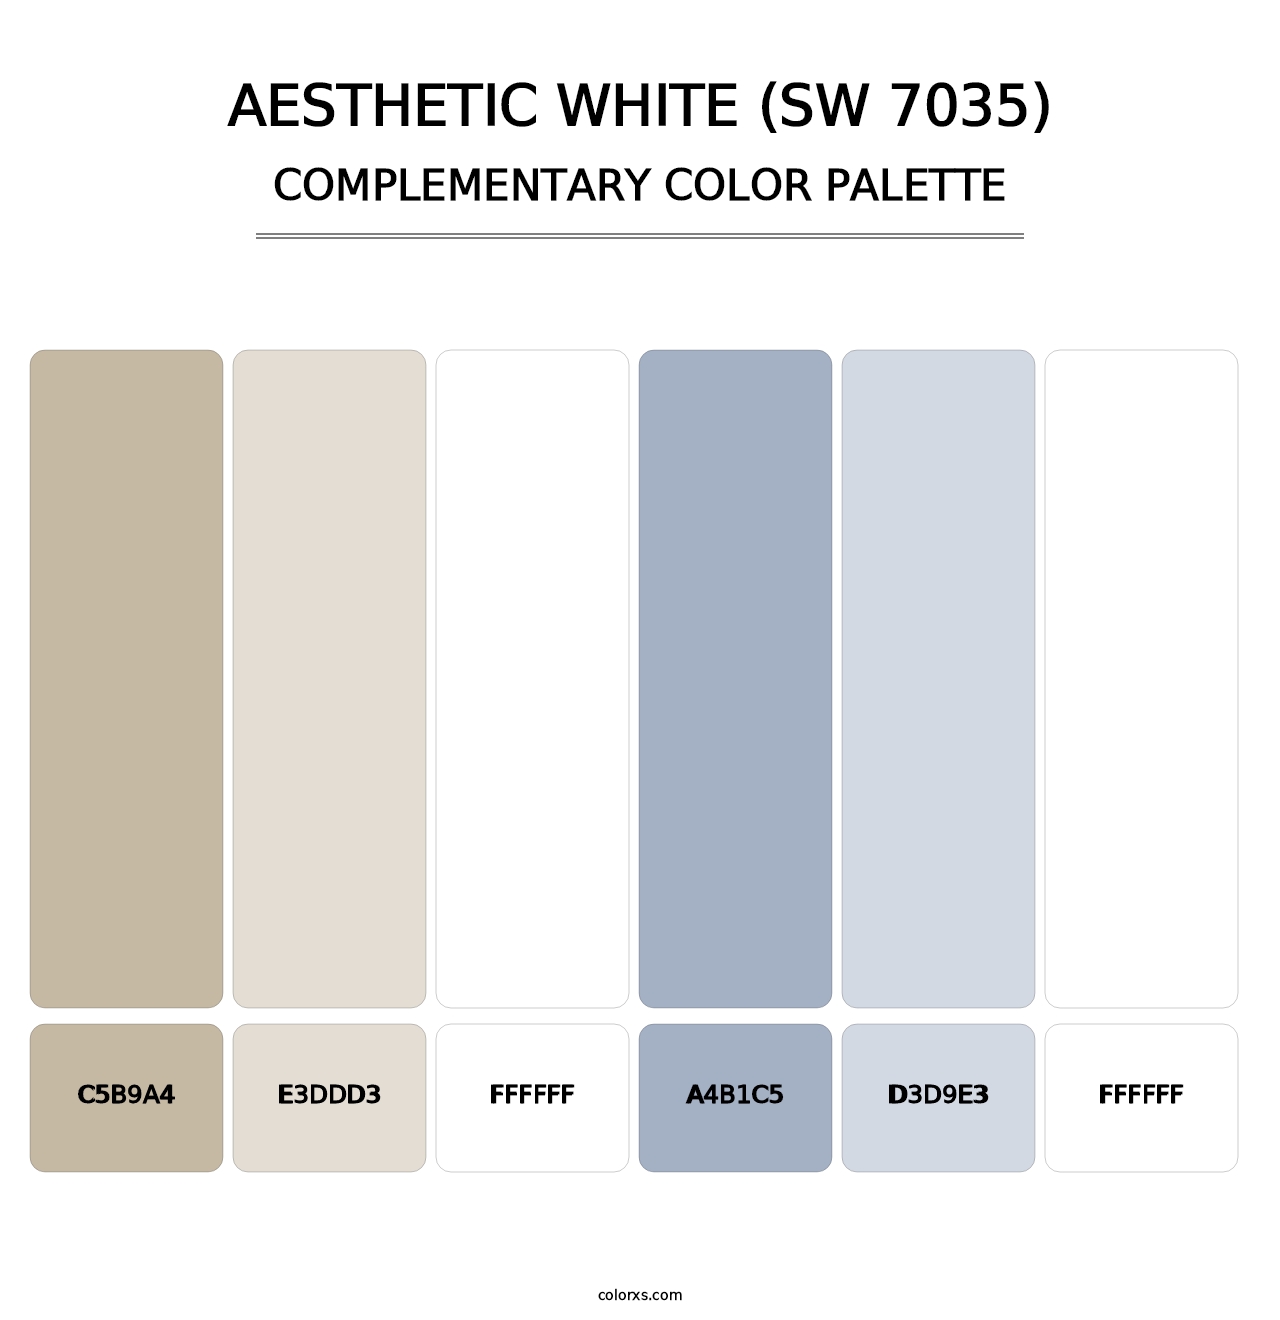 Aesthetic White (SW 7035) - Complementary Color Palette